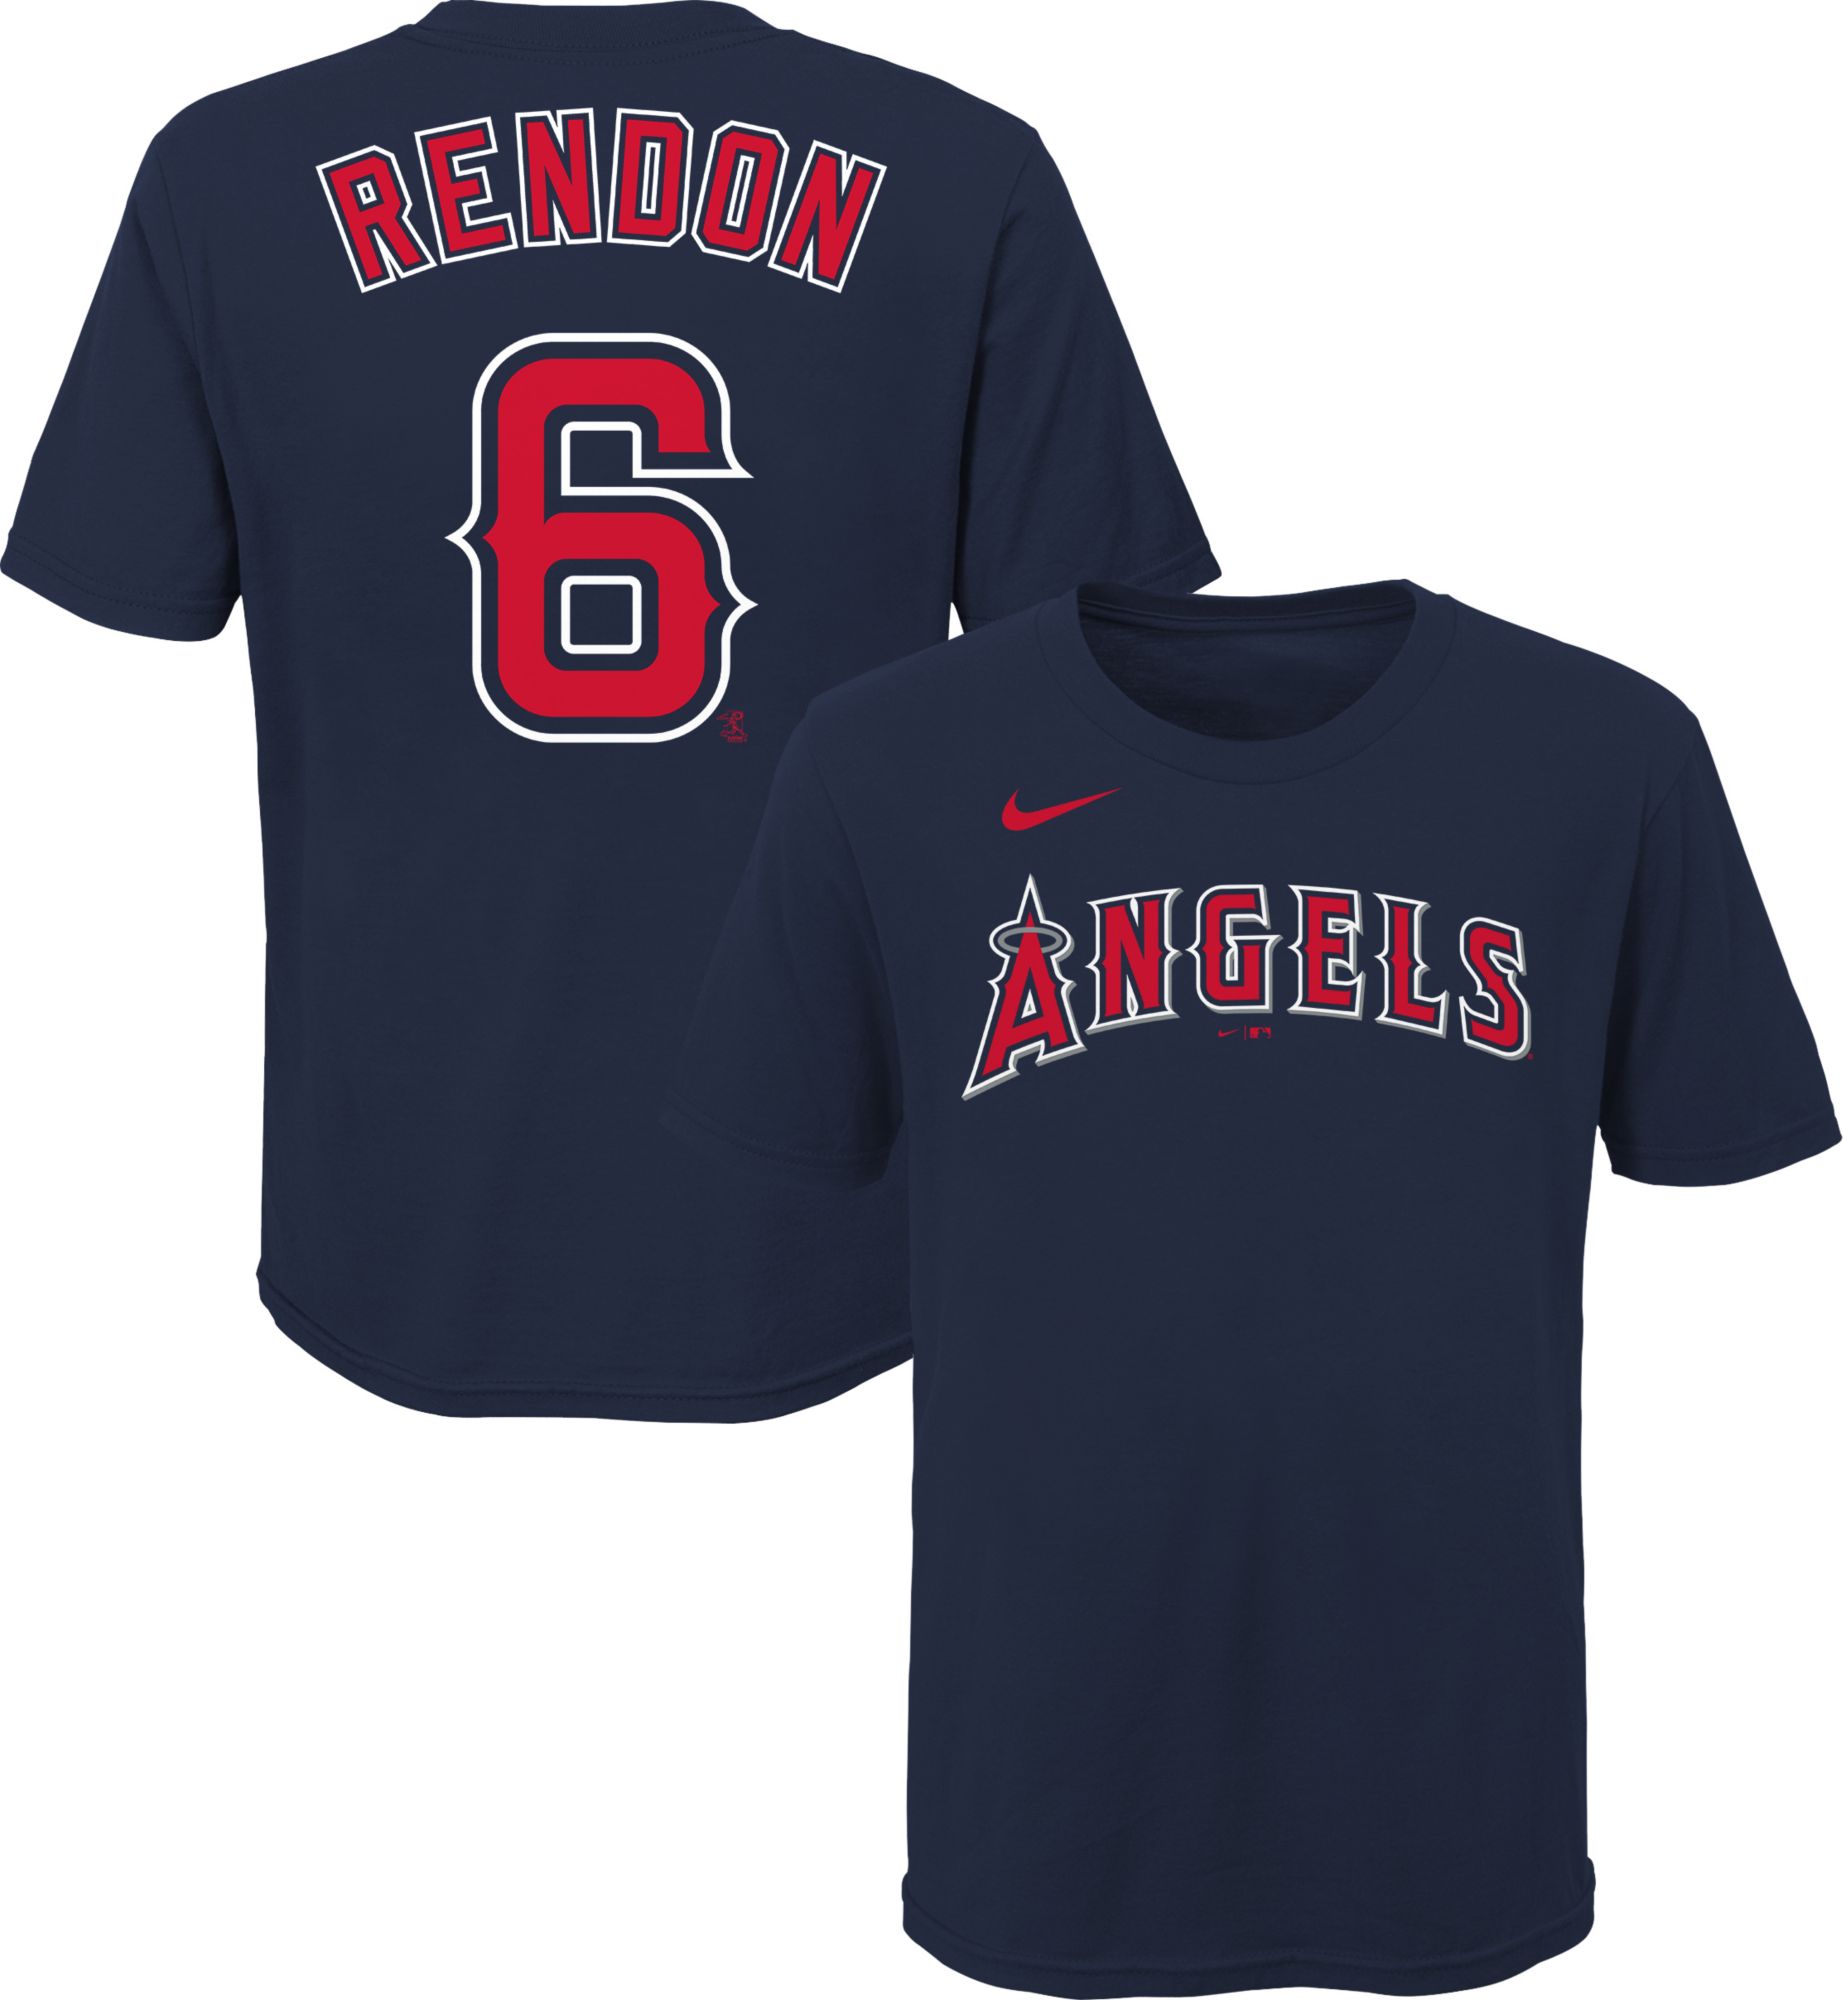 angels jerseys for sale